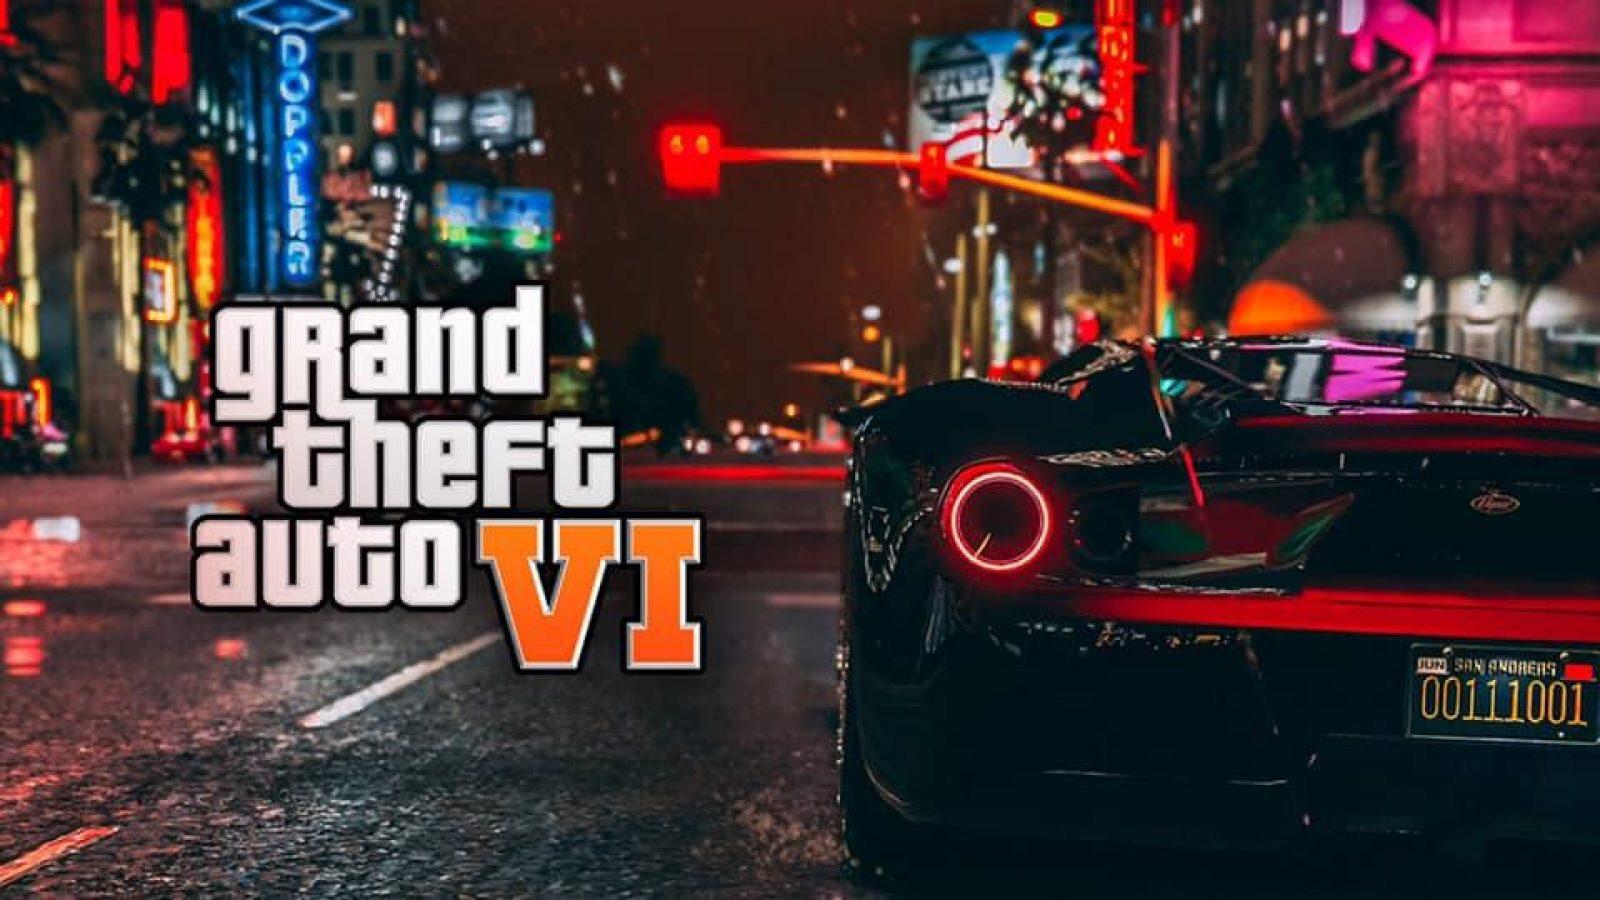 GTA VI' Confirmed — Will It Have a Female Protagonist?